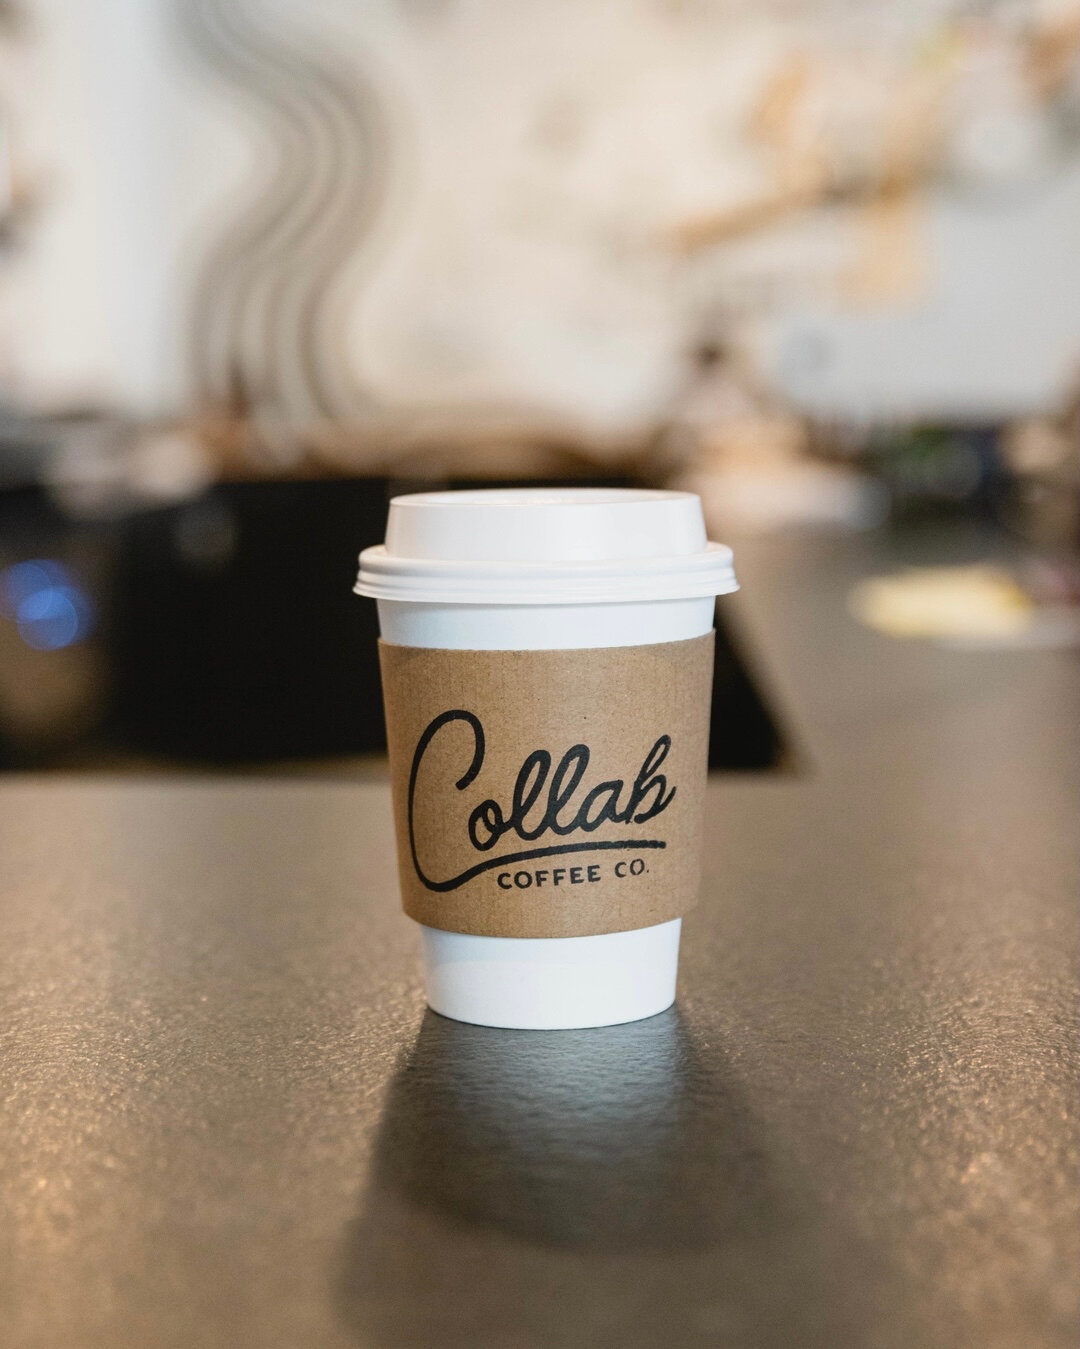 A new day &amp; a fresh week 🌿 Come cozy up with us on the rainy, overcast day. We&rsquo;re here till 7p! ​​​​​​​​
​​​​​​​​
#collabcoffee #thecollaborative #tulsaok #midtowntulsa #coffeetulsa #tulsacoffee #tulsacoffeeshop #visittulsa #baristadaily #